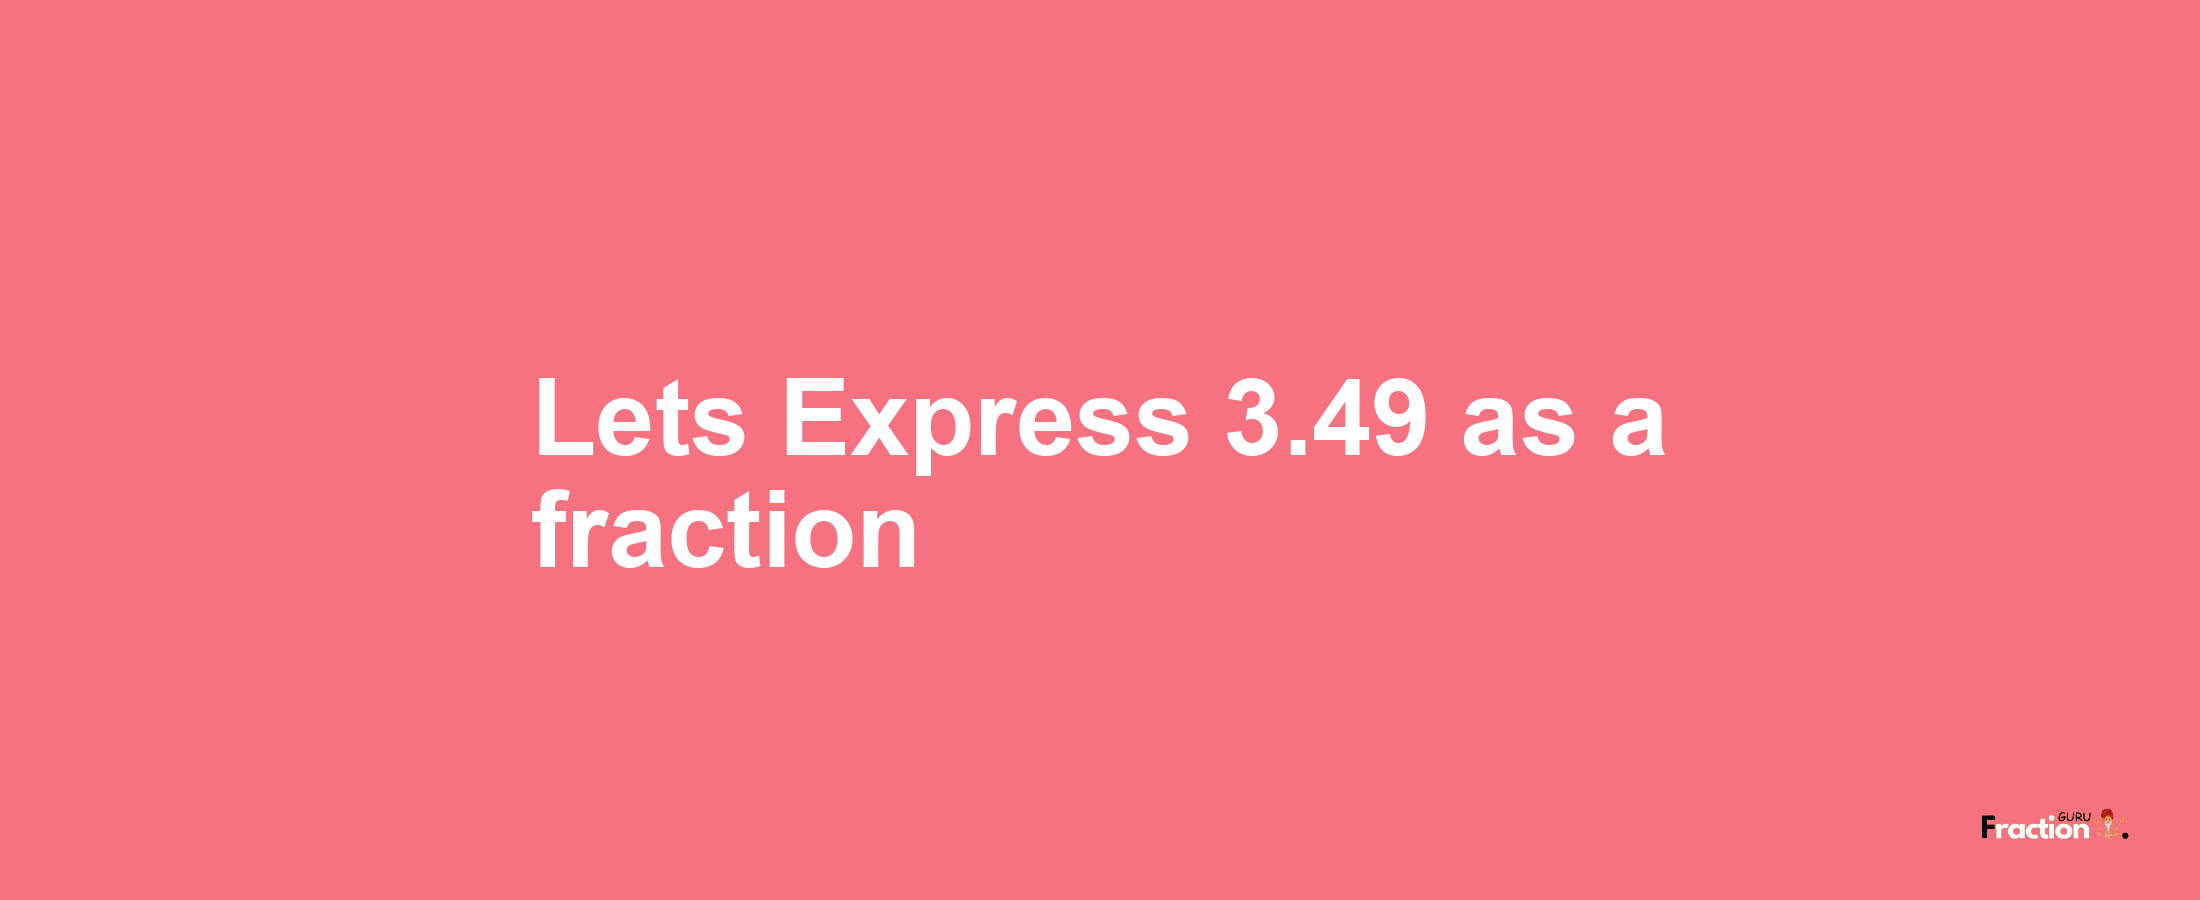 Lets Express 3.49 as afraction